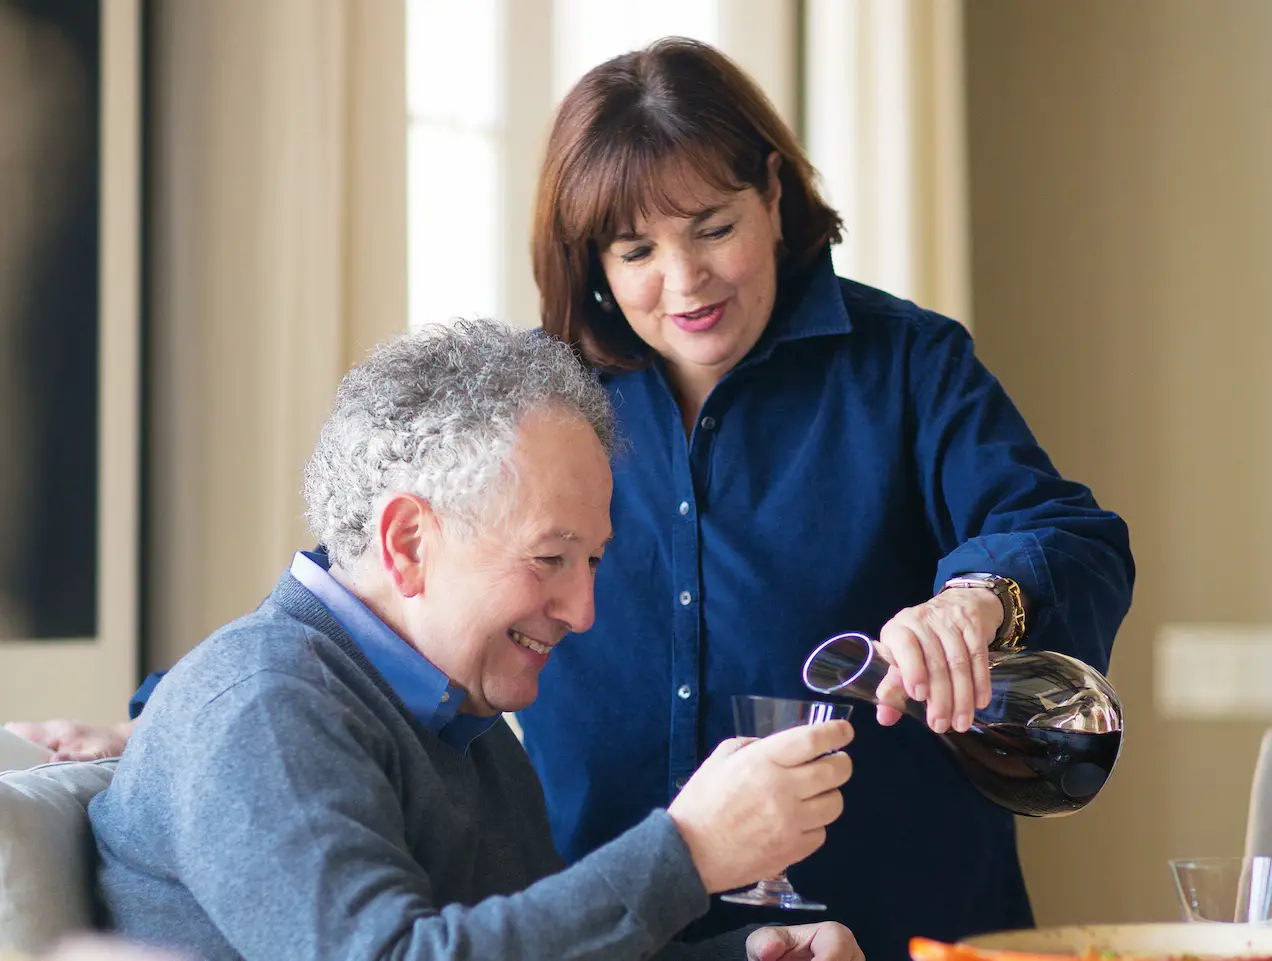 Ina Garten Pouring drinks for her husband Jeffrey